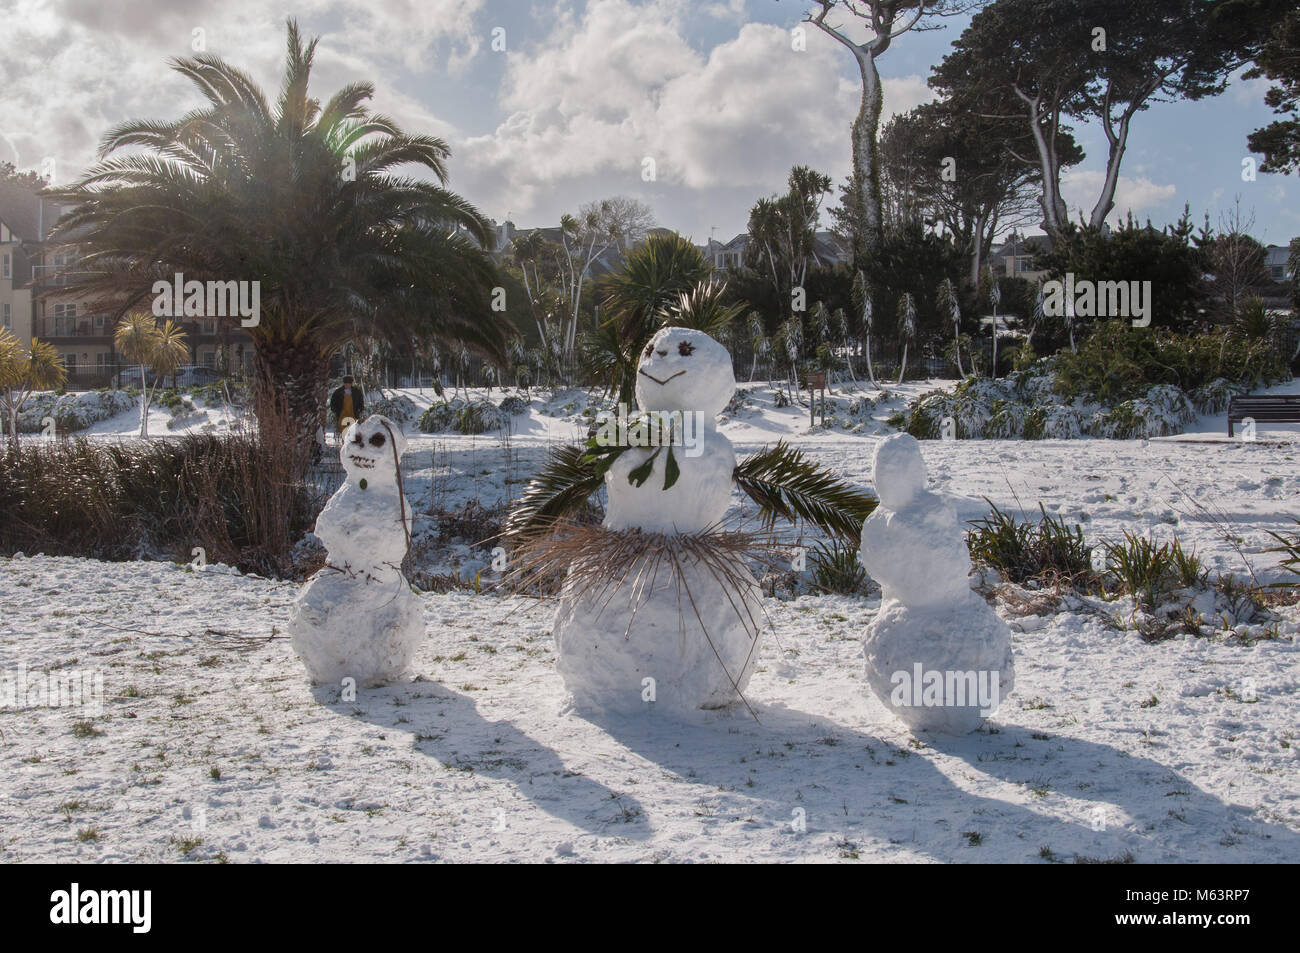 Falmouth, UK. 28th February 2018. Snowmen built among the palm trees in Queen Mary Gardens during a cold snap, Falmouth, Cornwall. Lisa Söderström/Alamy Live News Stock Photo